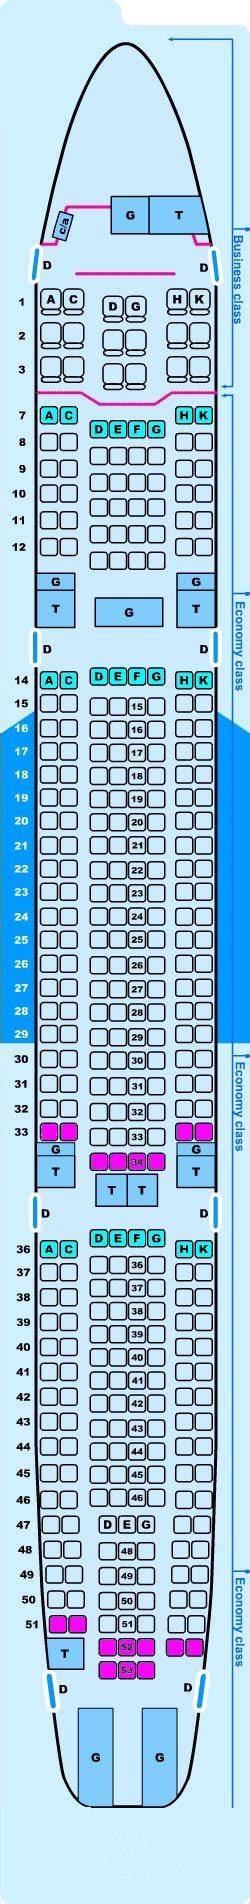 Airbus a330-300 seat chart. The Aer Lingus Airbus A330-300 is primarily operated on medium to long-haul routes. This A330-300 features a two class configuration with 30 flat bed Business Class seats and 287 standard Economy Class seats. 